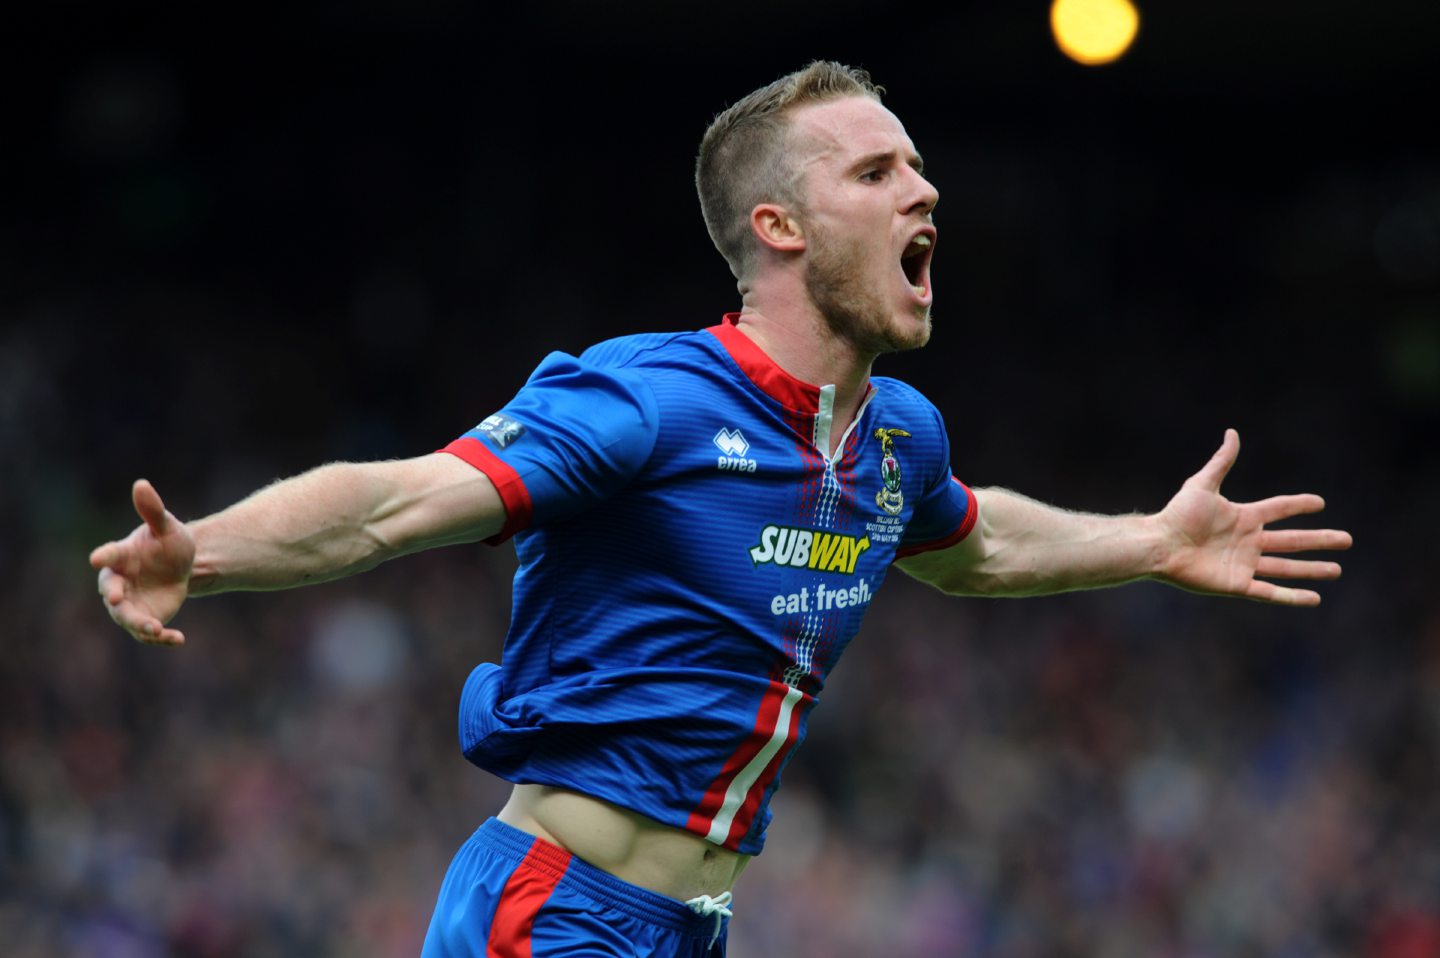 Marley Watkins scored for Caley Thistle in the 2015 Scottish Cup final.